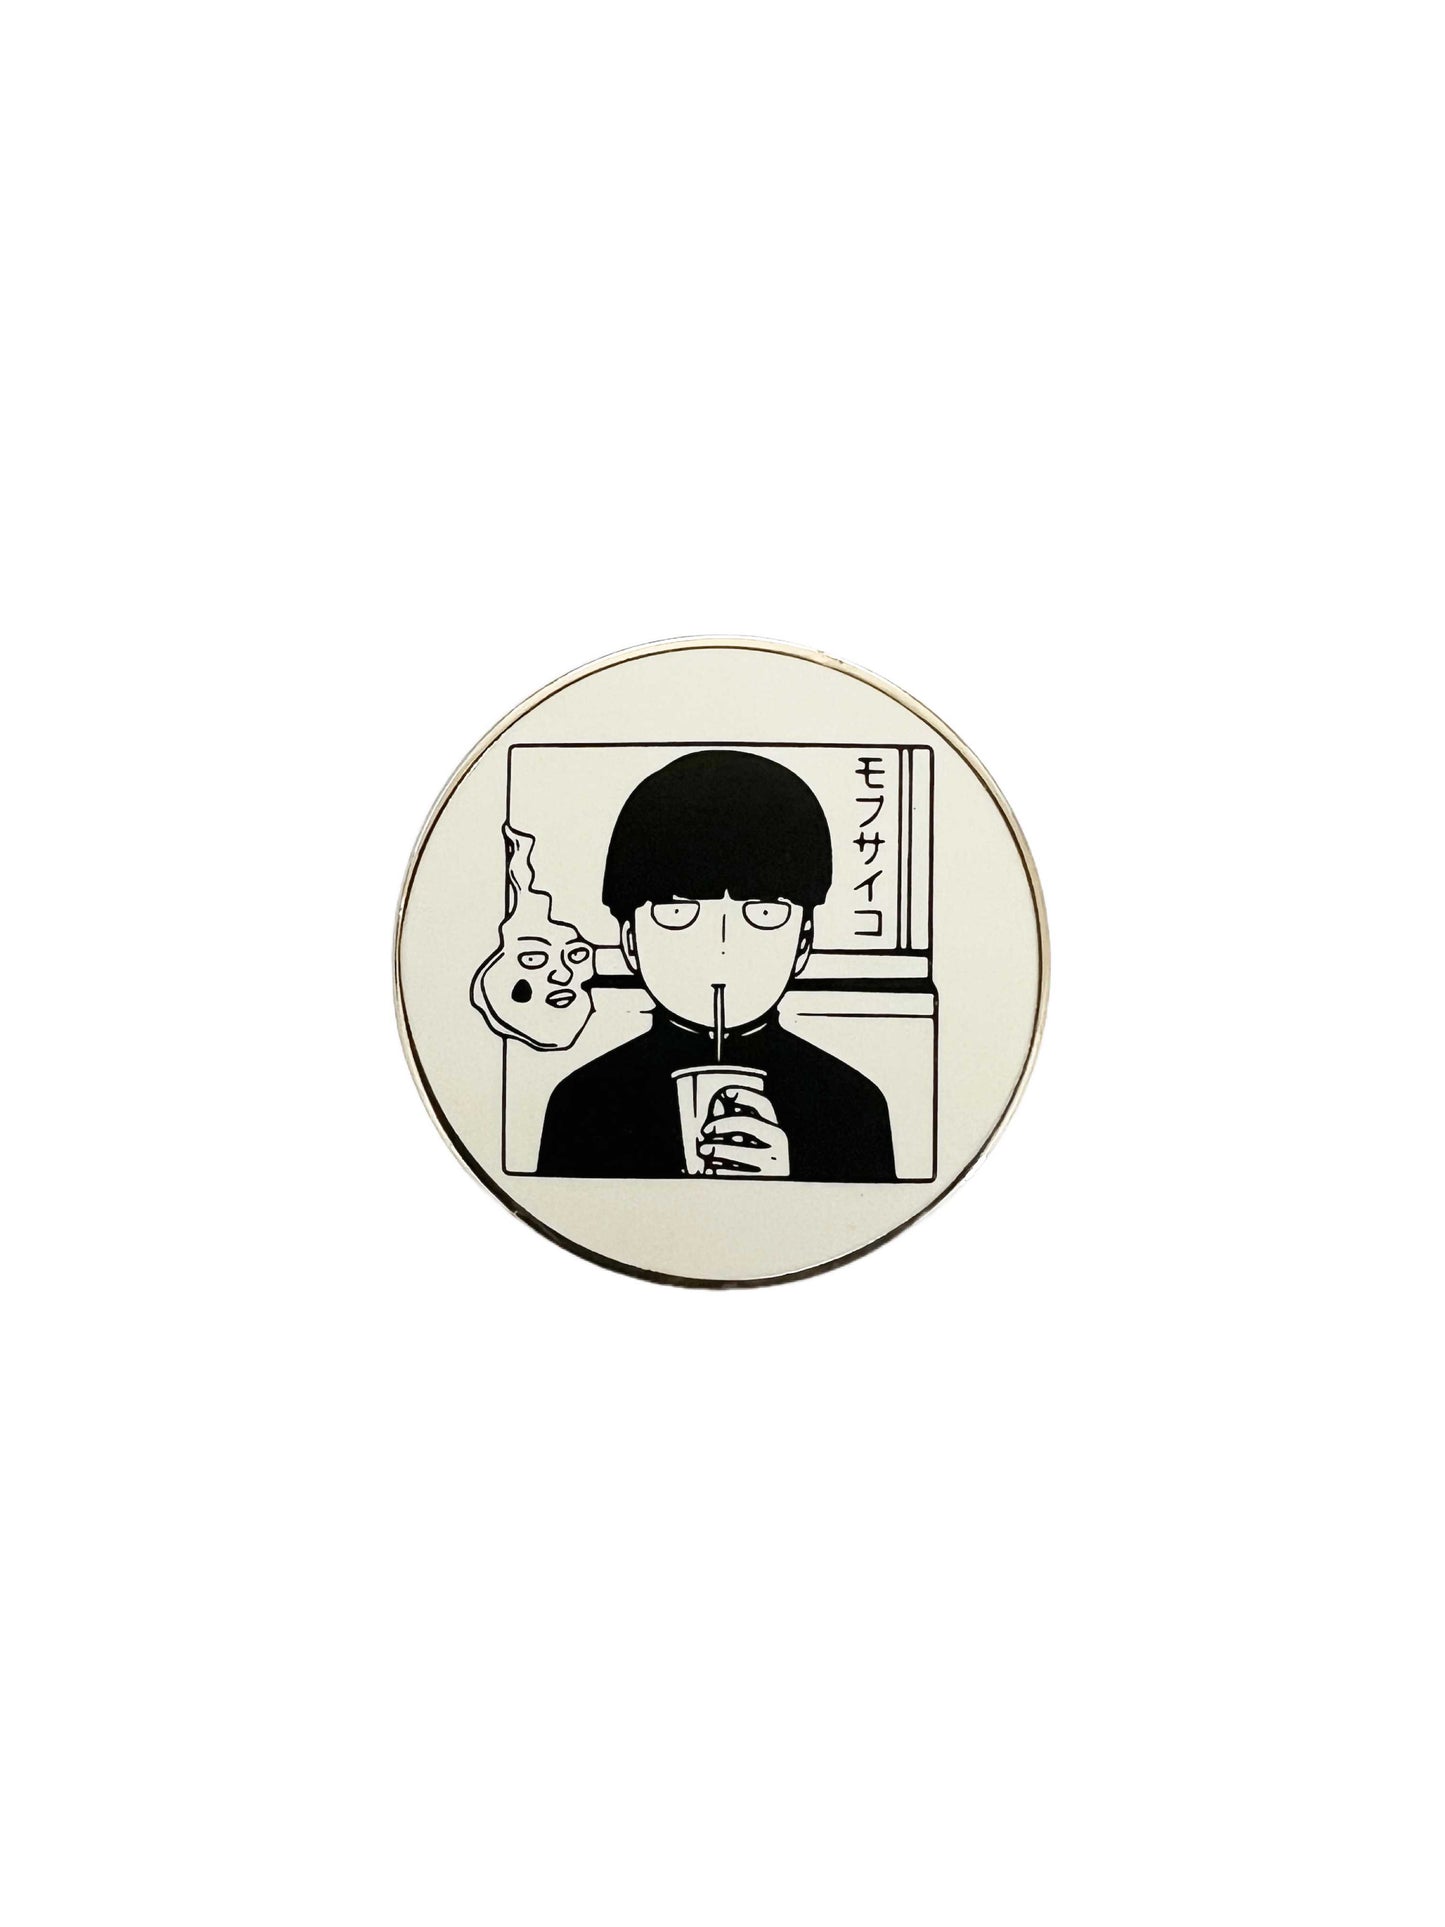 Anime Mob Psycho 100 Japan Enamel Metal Pin Badge Jewelry Accessory for Backpack Clothes Caps